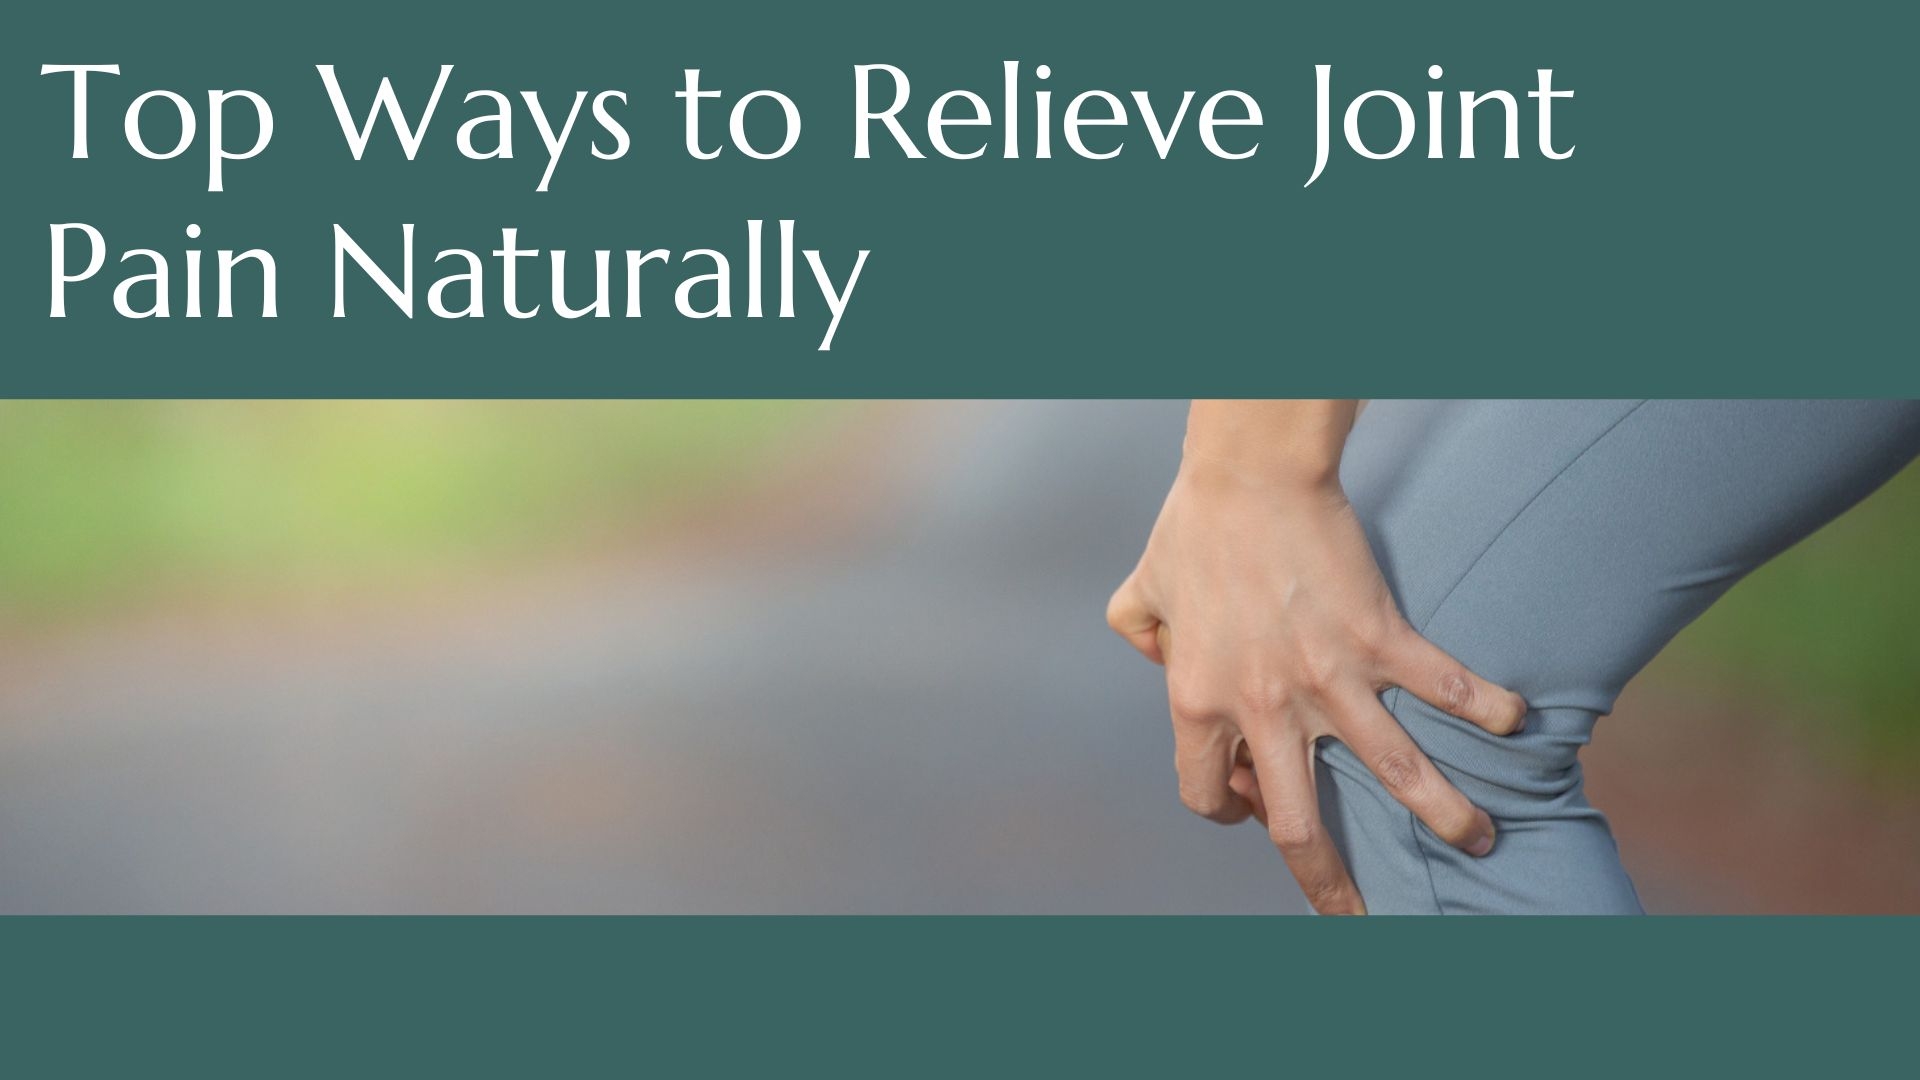 Top ways to relieve joint pain naturally